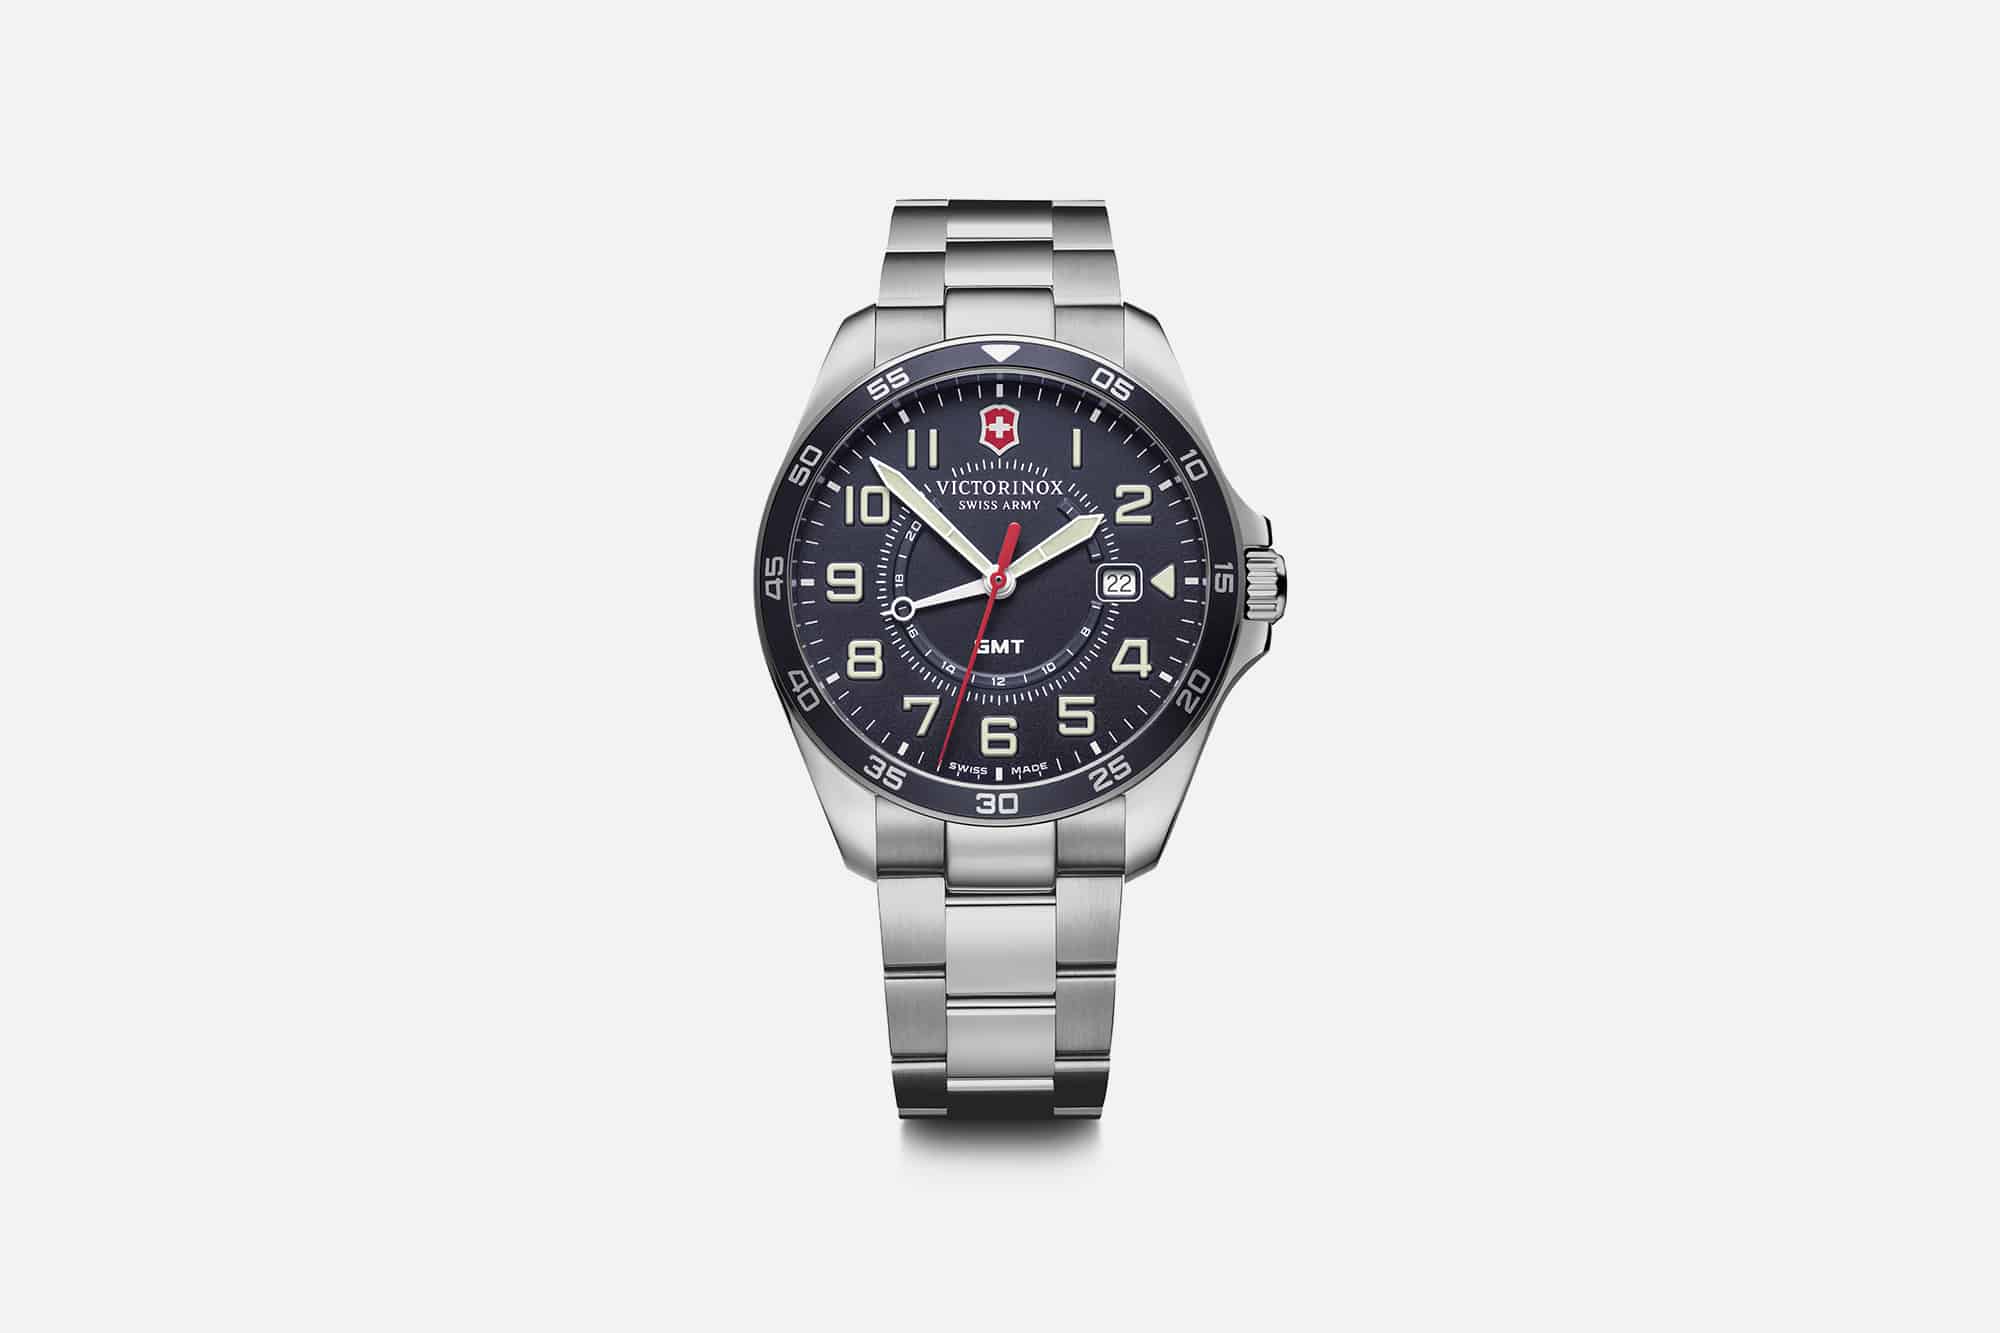 Victorinox Updates their FieldForce Line with a Series of Tough but Wearable GMTs